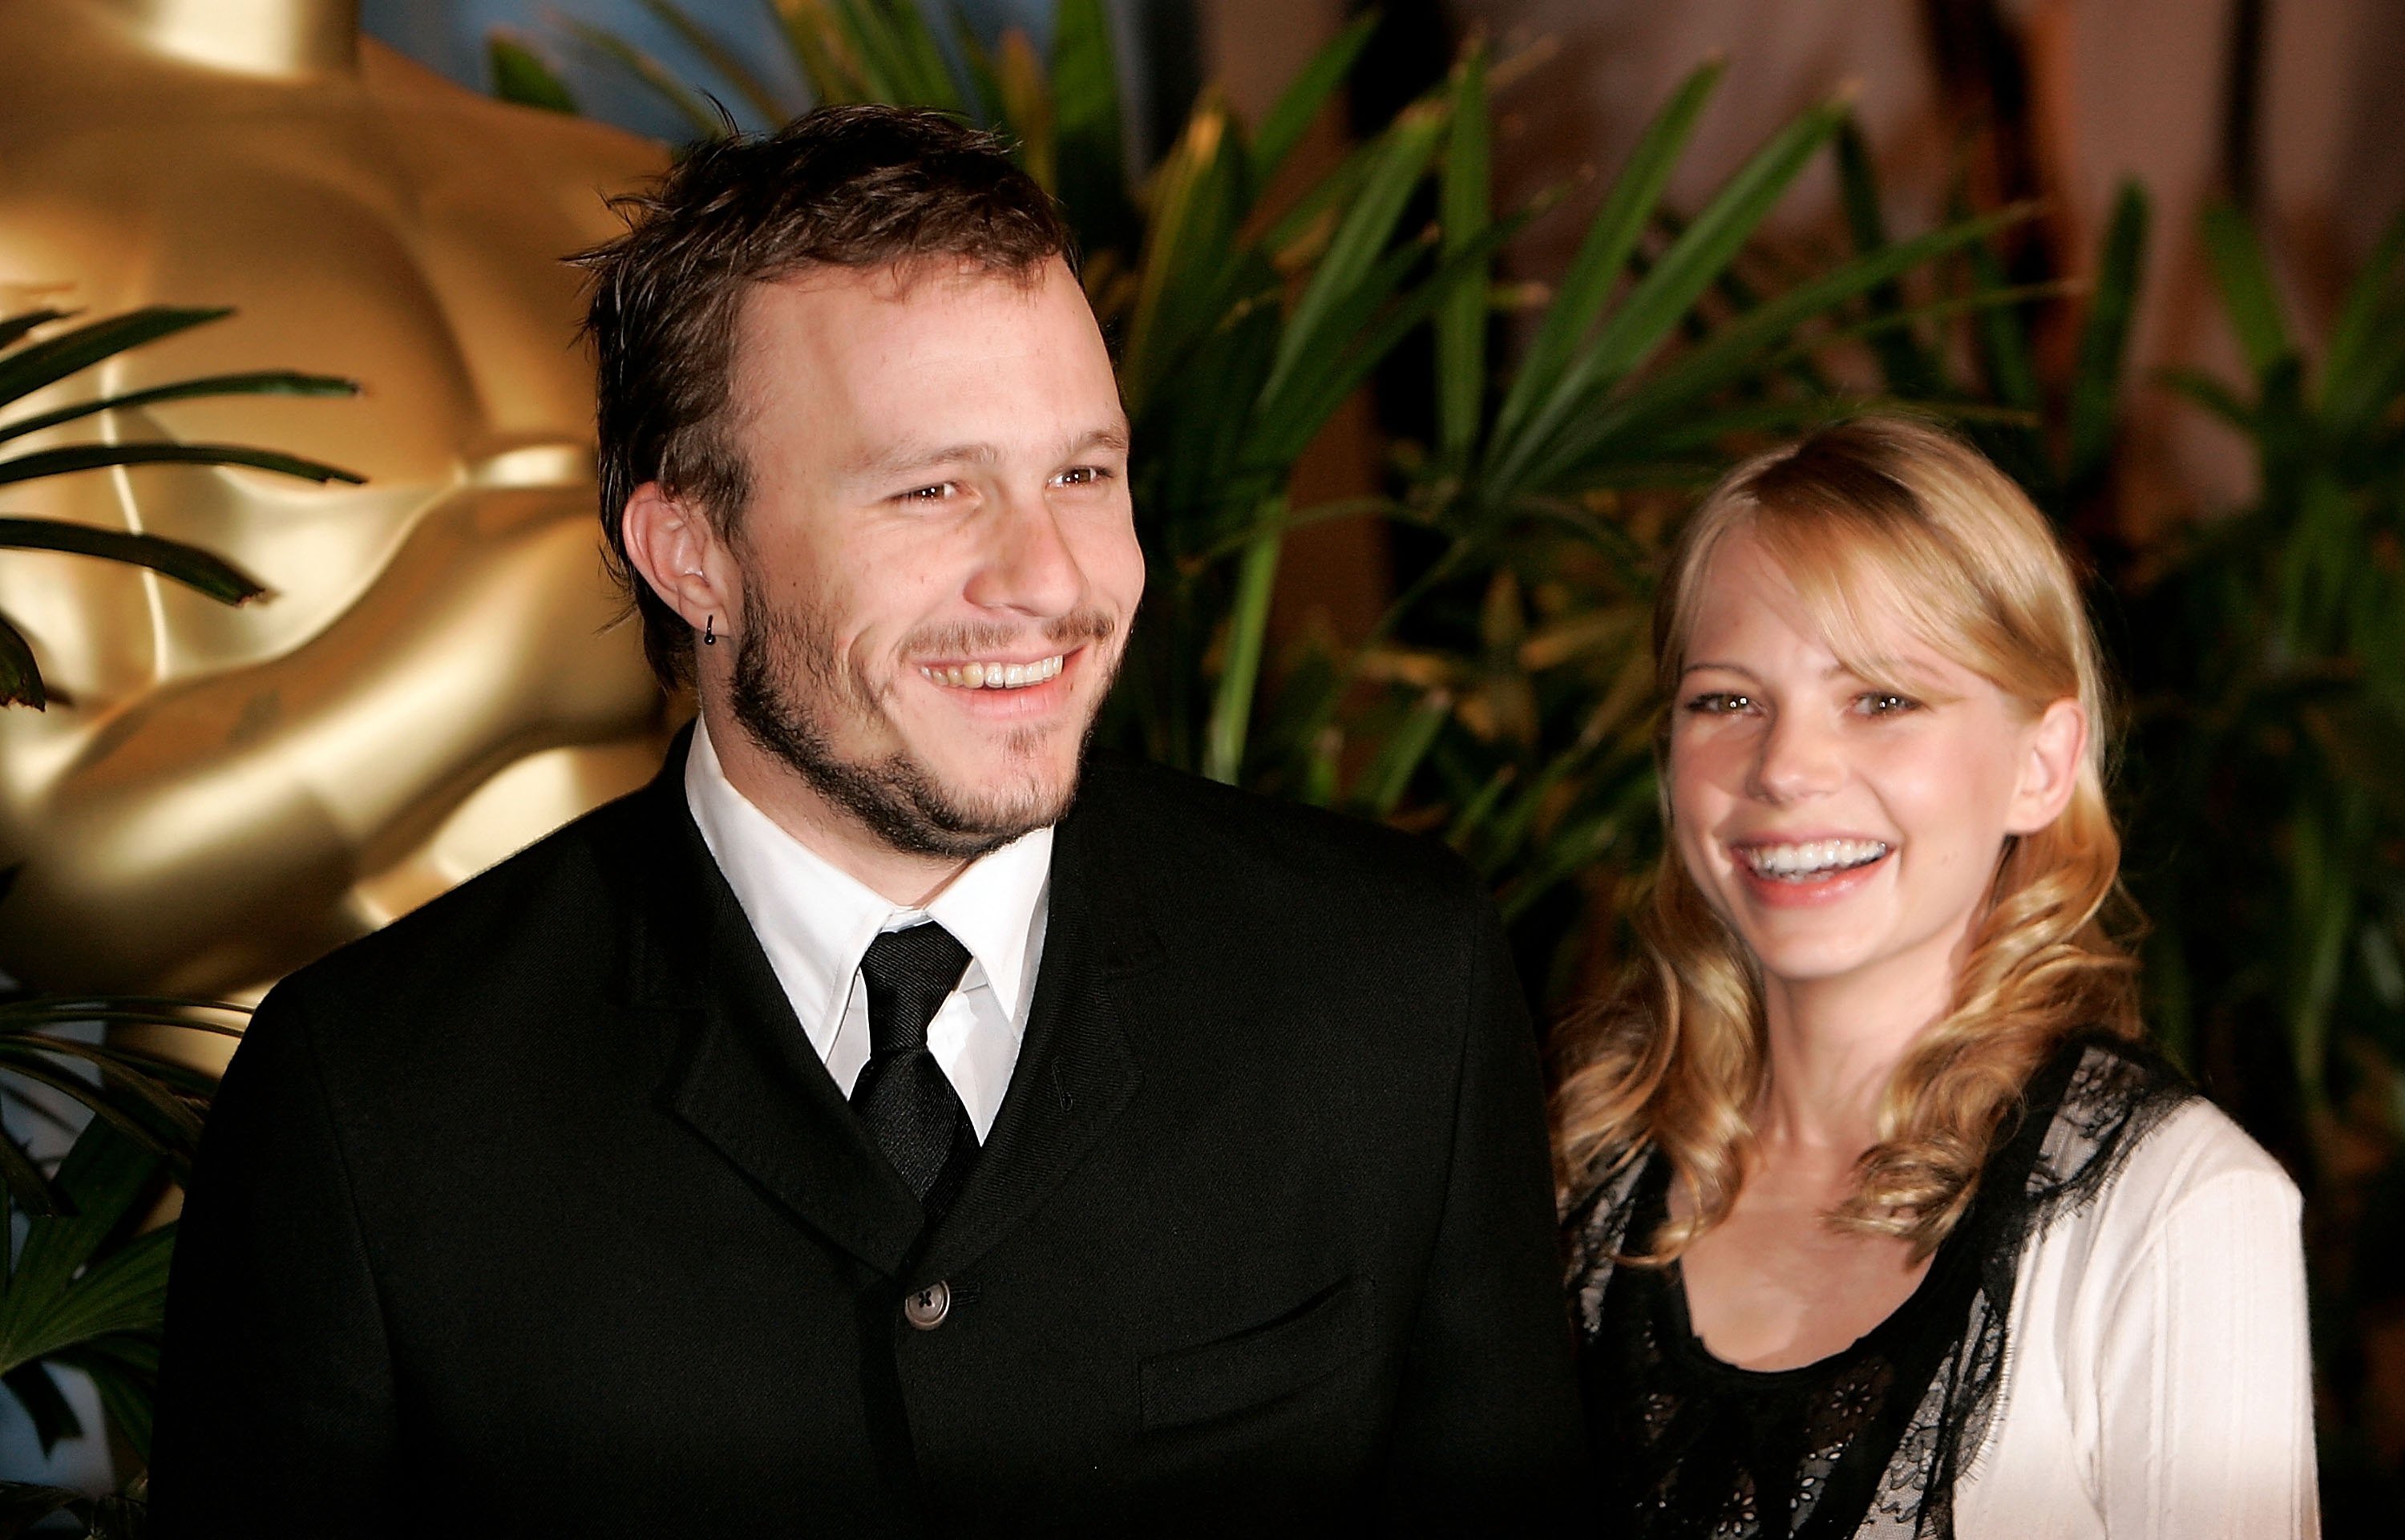 Heath Ledger and Michelle Williams at the Oscar Nominees Luncheon in 2006. | Source: Getty Images